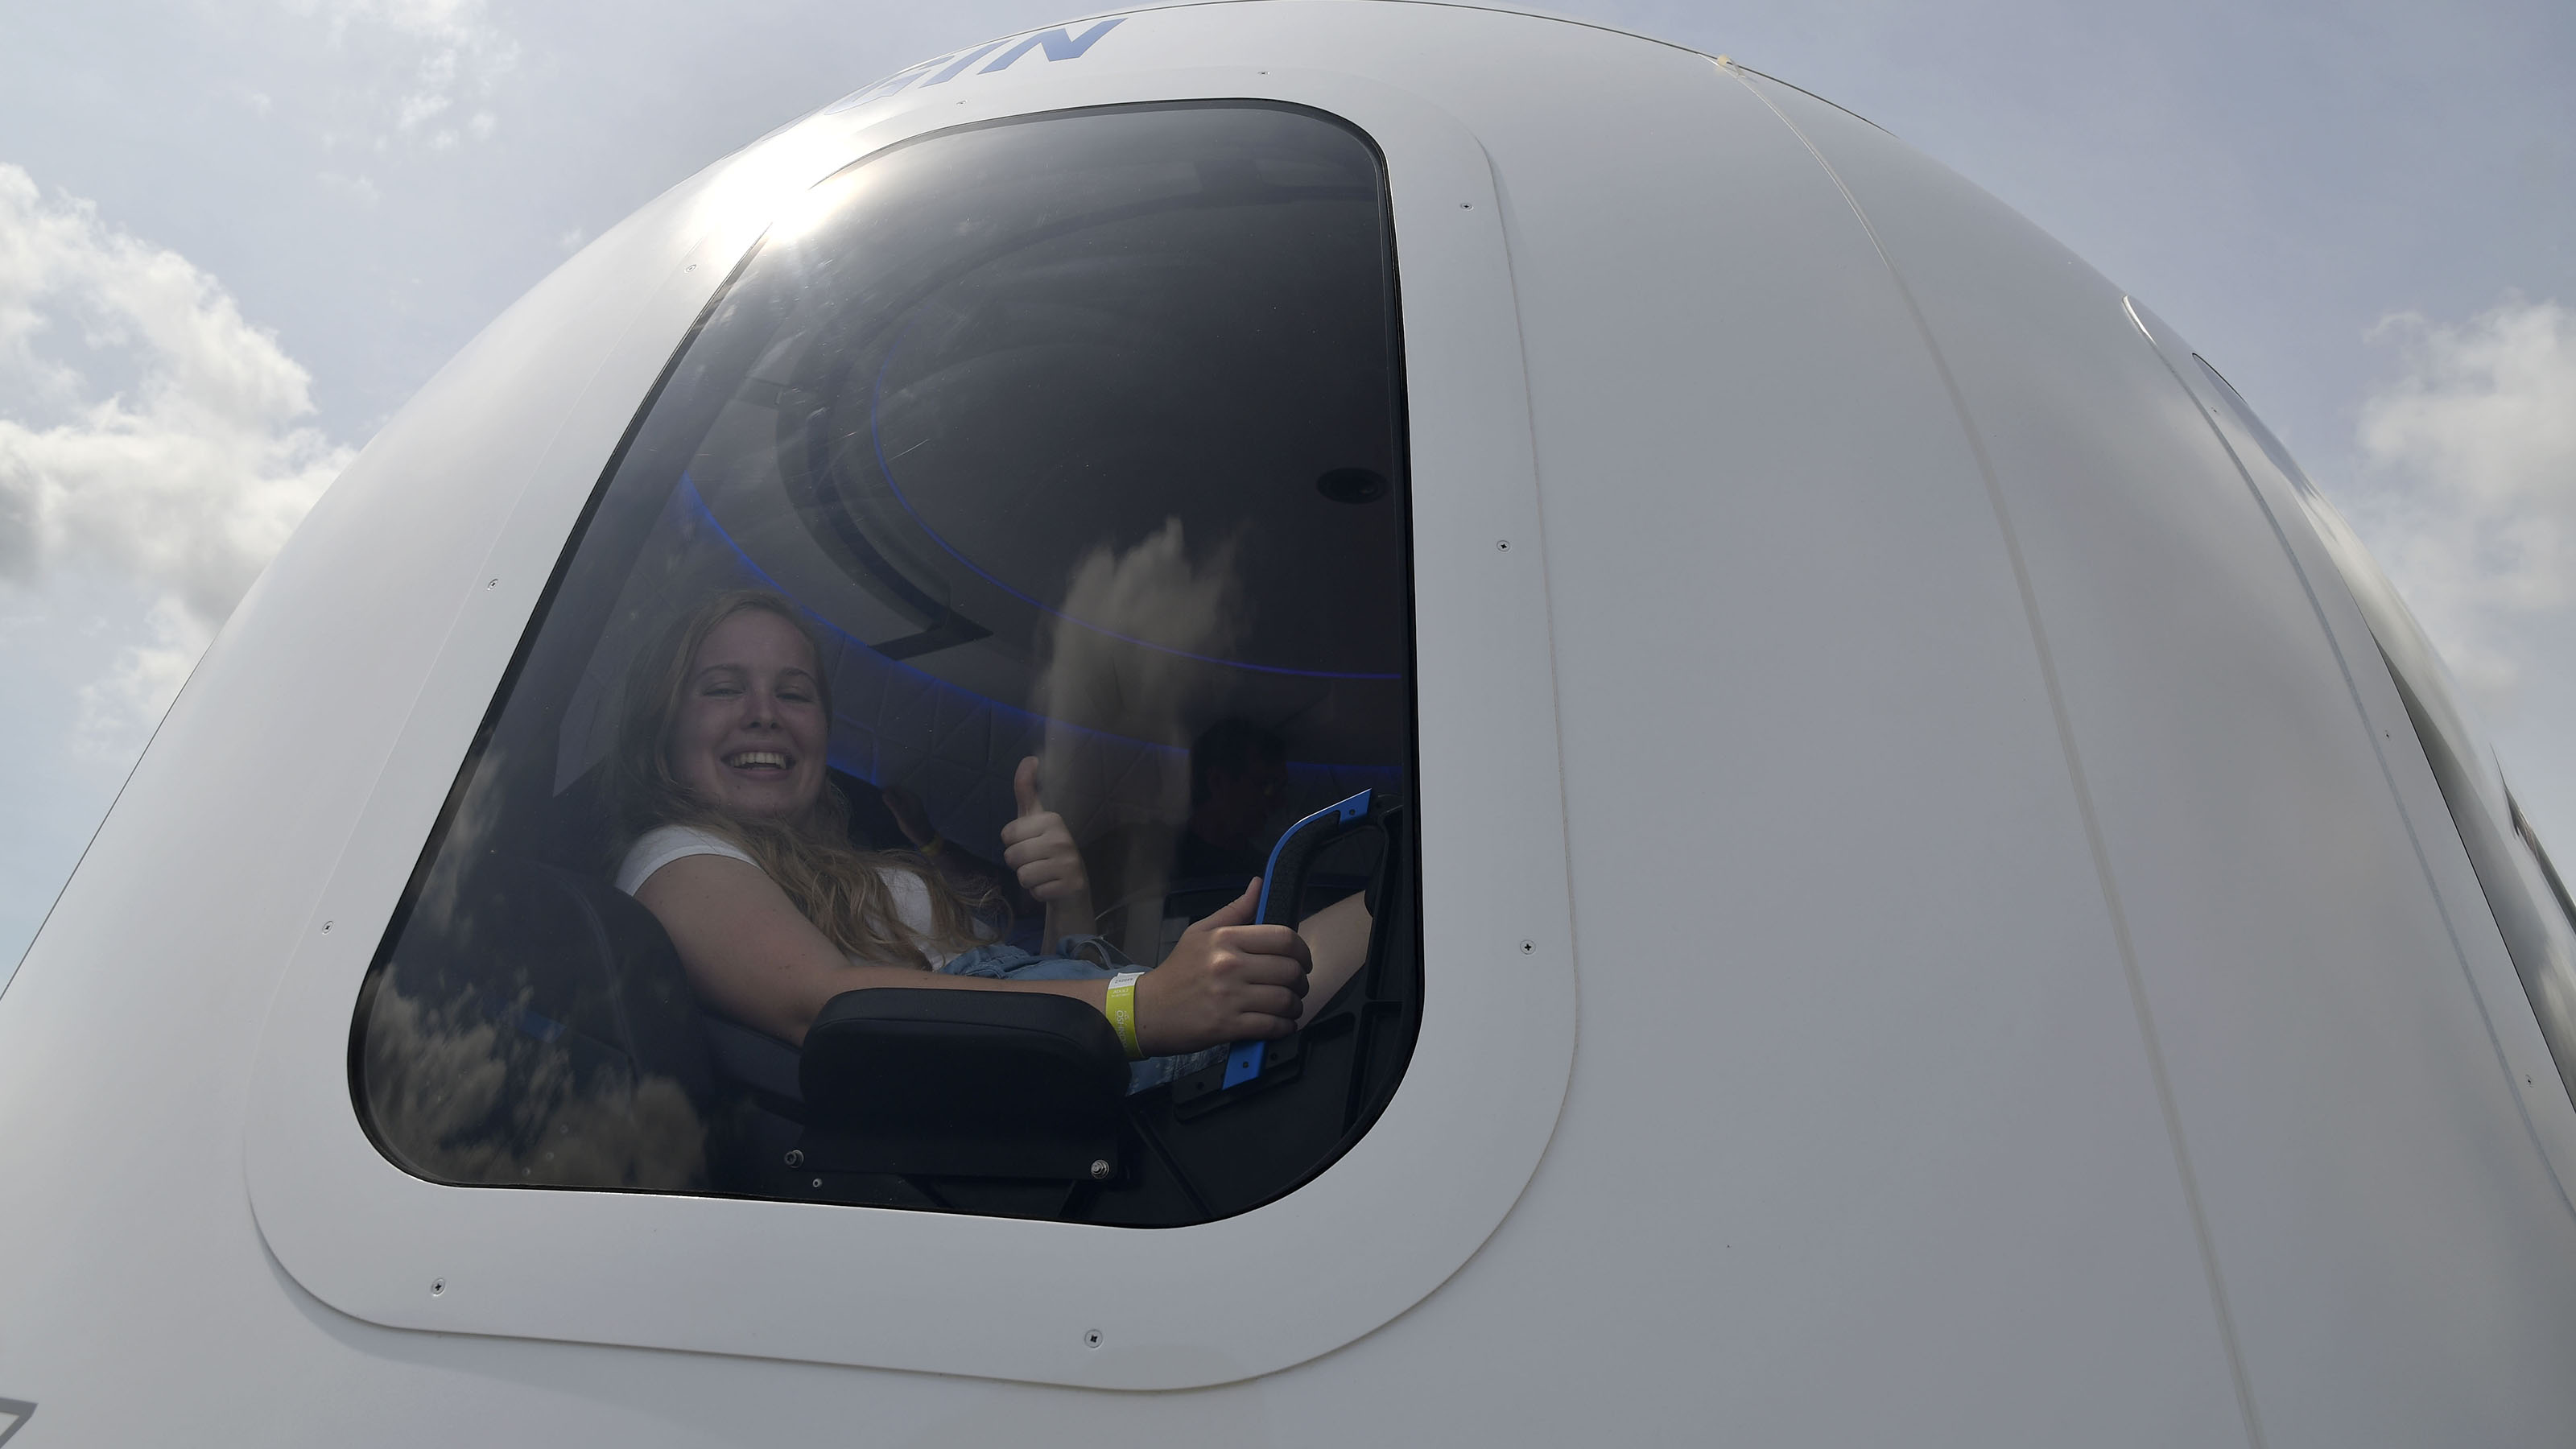 EAA AirVenture attendees experience what it's like to be an astronaut inside the Blue Origin space capsule mockup on display at Boeing Square in Oshkosh, Wisconsin. Photo by David Tulis.